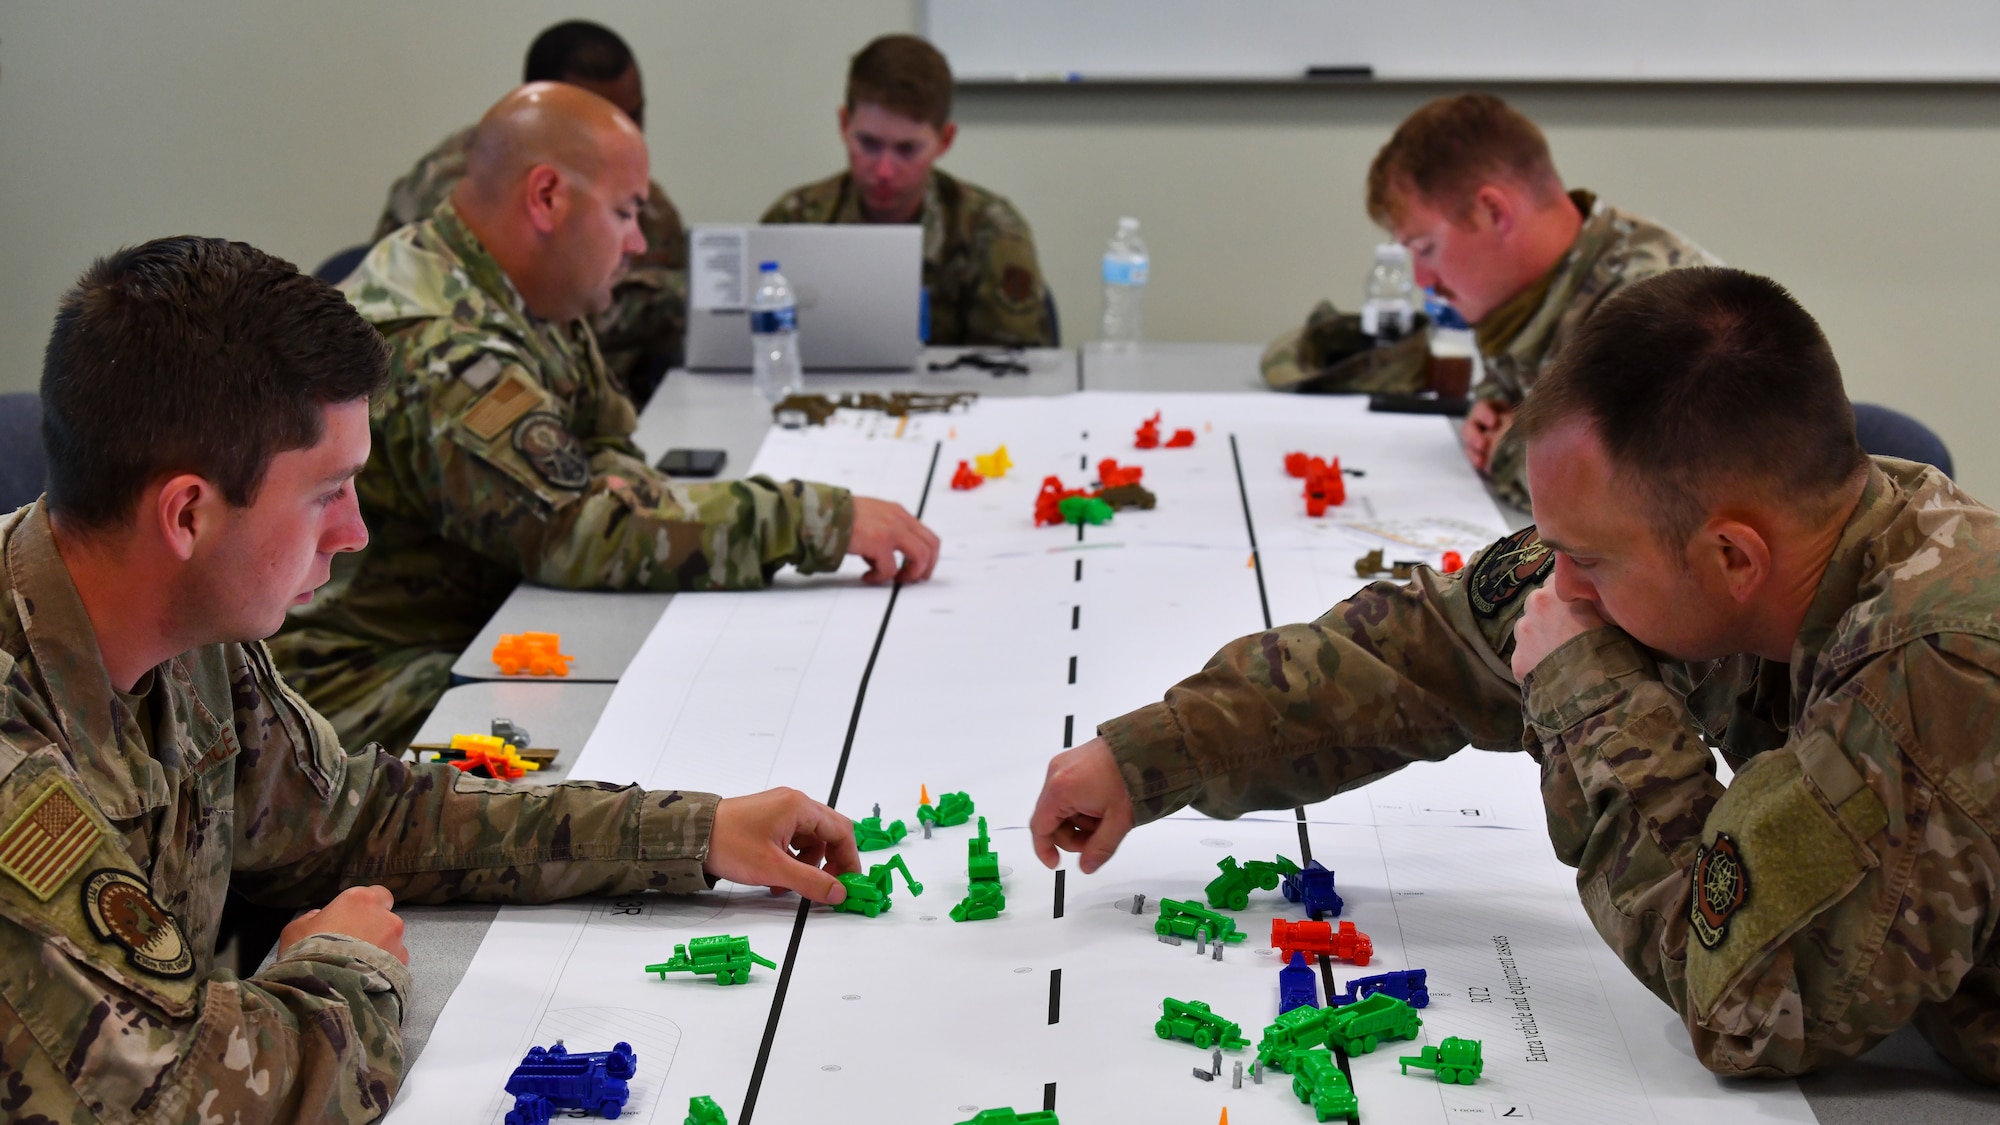 Civil engineering Airmen evaluate where to place their assets on a replica of a damaged flightline for a tabletop exercise during Exercise Mobility Guardian 2021 at Alpena Combat Readiness Training Center, Mich., May 22, 2021. Mobility Guardian is the Air Force's largest and longest exercise ensuring readiness to move personnel and equipment in combat operations. (U.S. Air Force photo by Tech. Sgt. Kentavist P. Brackin)